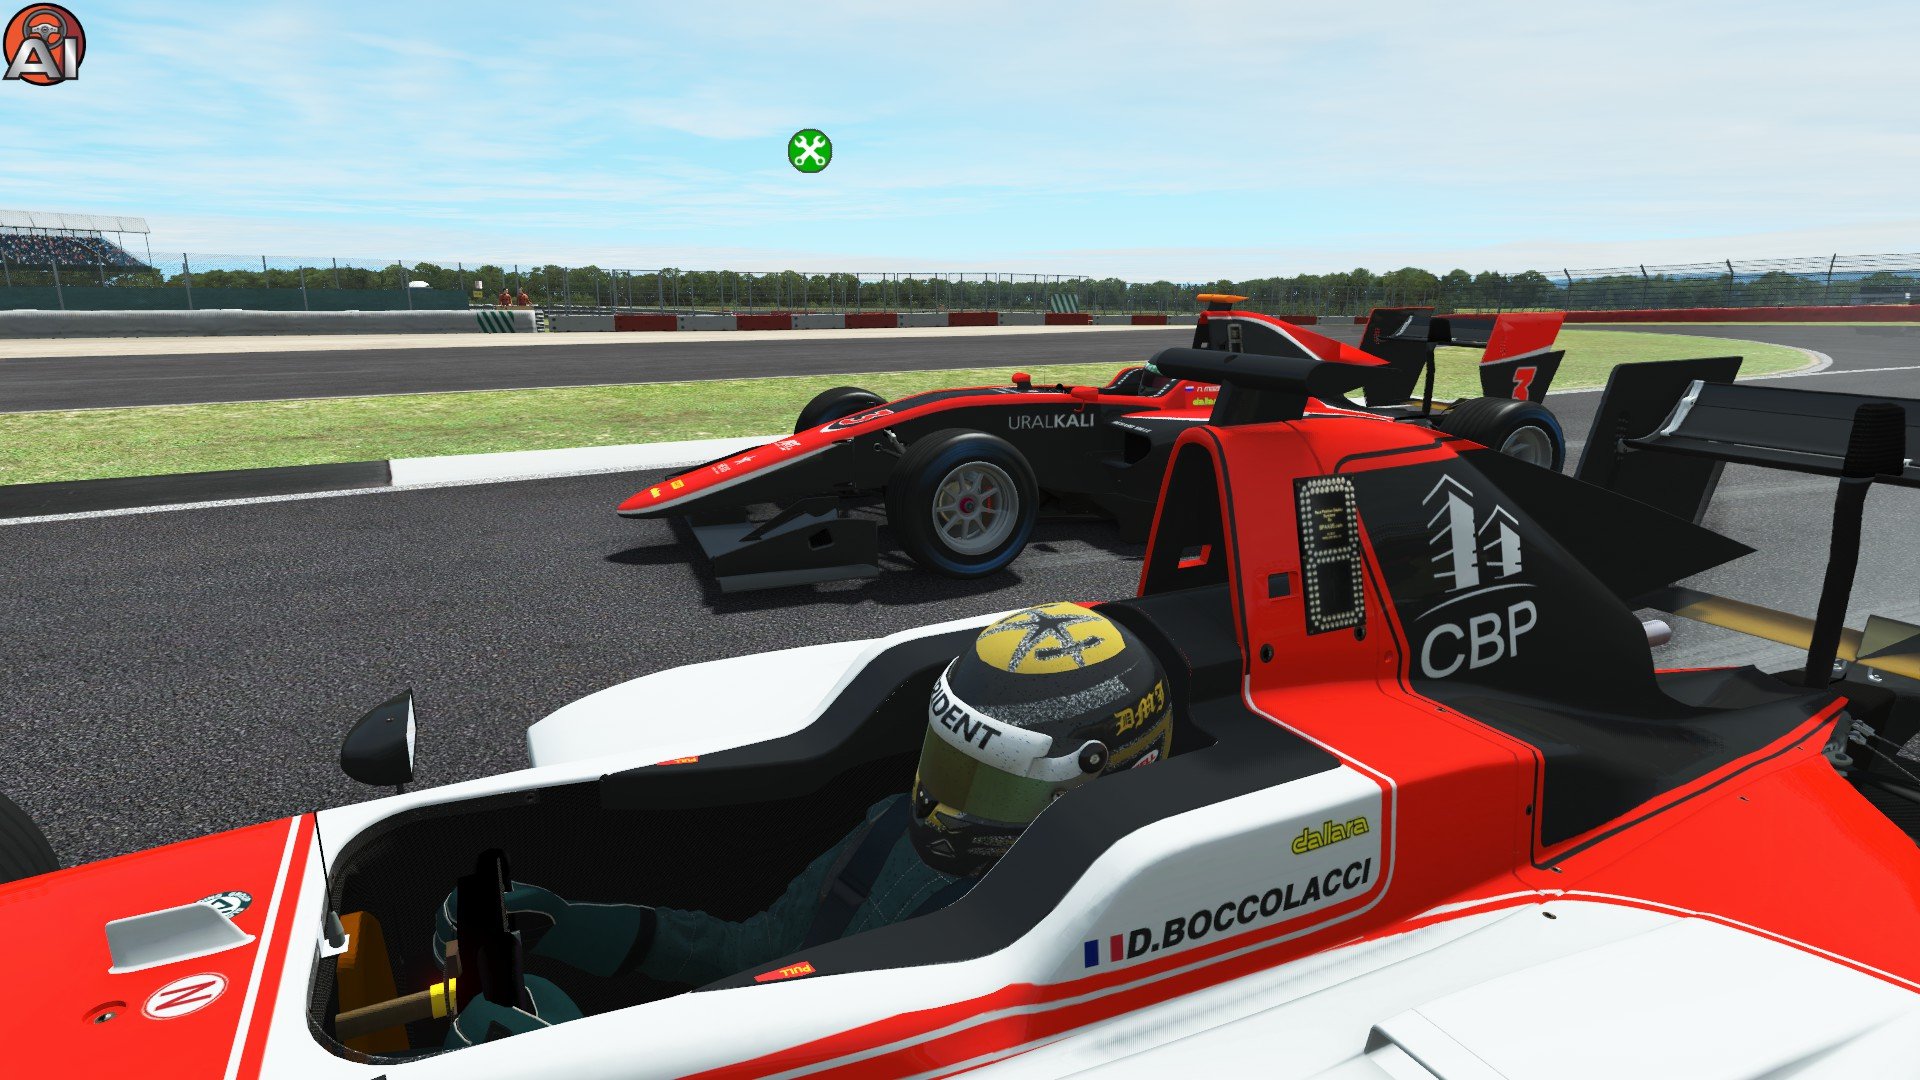 More information about "rFactor 2: GP3 Series 2017-2018 v2.01 disponibile"